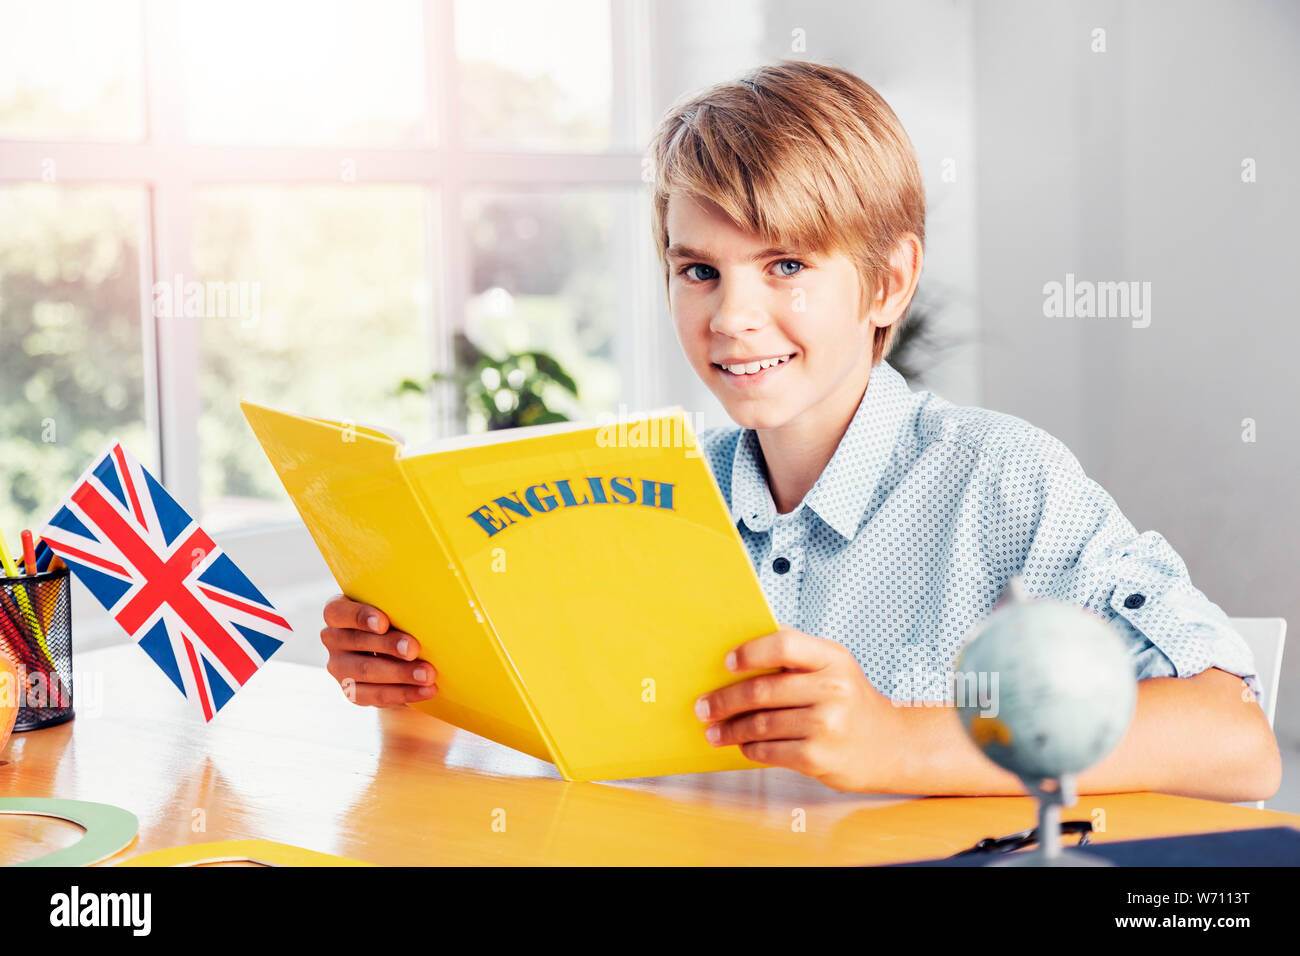 Young blonde smiling boy holding yellow english language book in light classroom Stock Photo